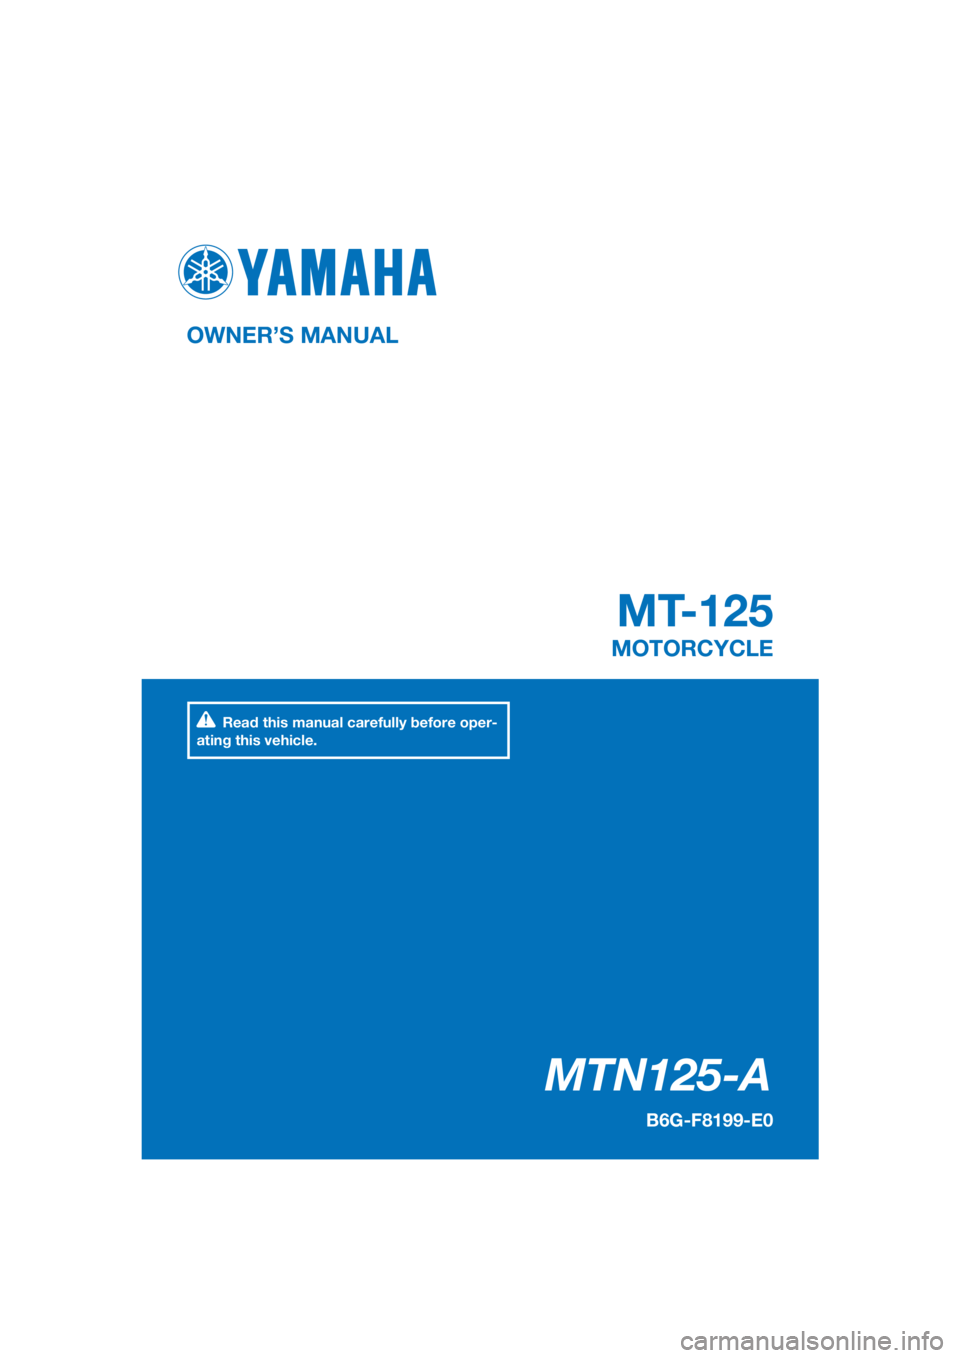 YAMAHA MT-125 2020  Owners Manual PANTONE285C
MTN125-A
MT-125
OWNER’S MANUAL
B6G-F8199-E0
MOTORCYCLE
[English  (E)]
Read this manual carefully before oper-
ating this vehicle. 